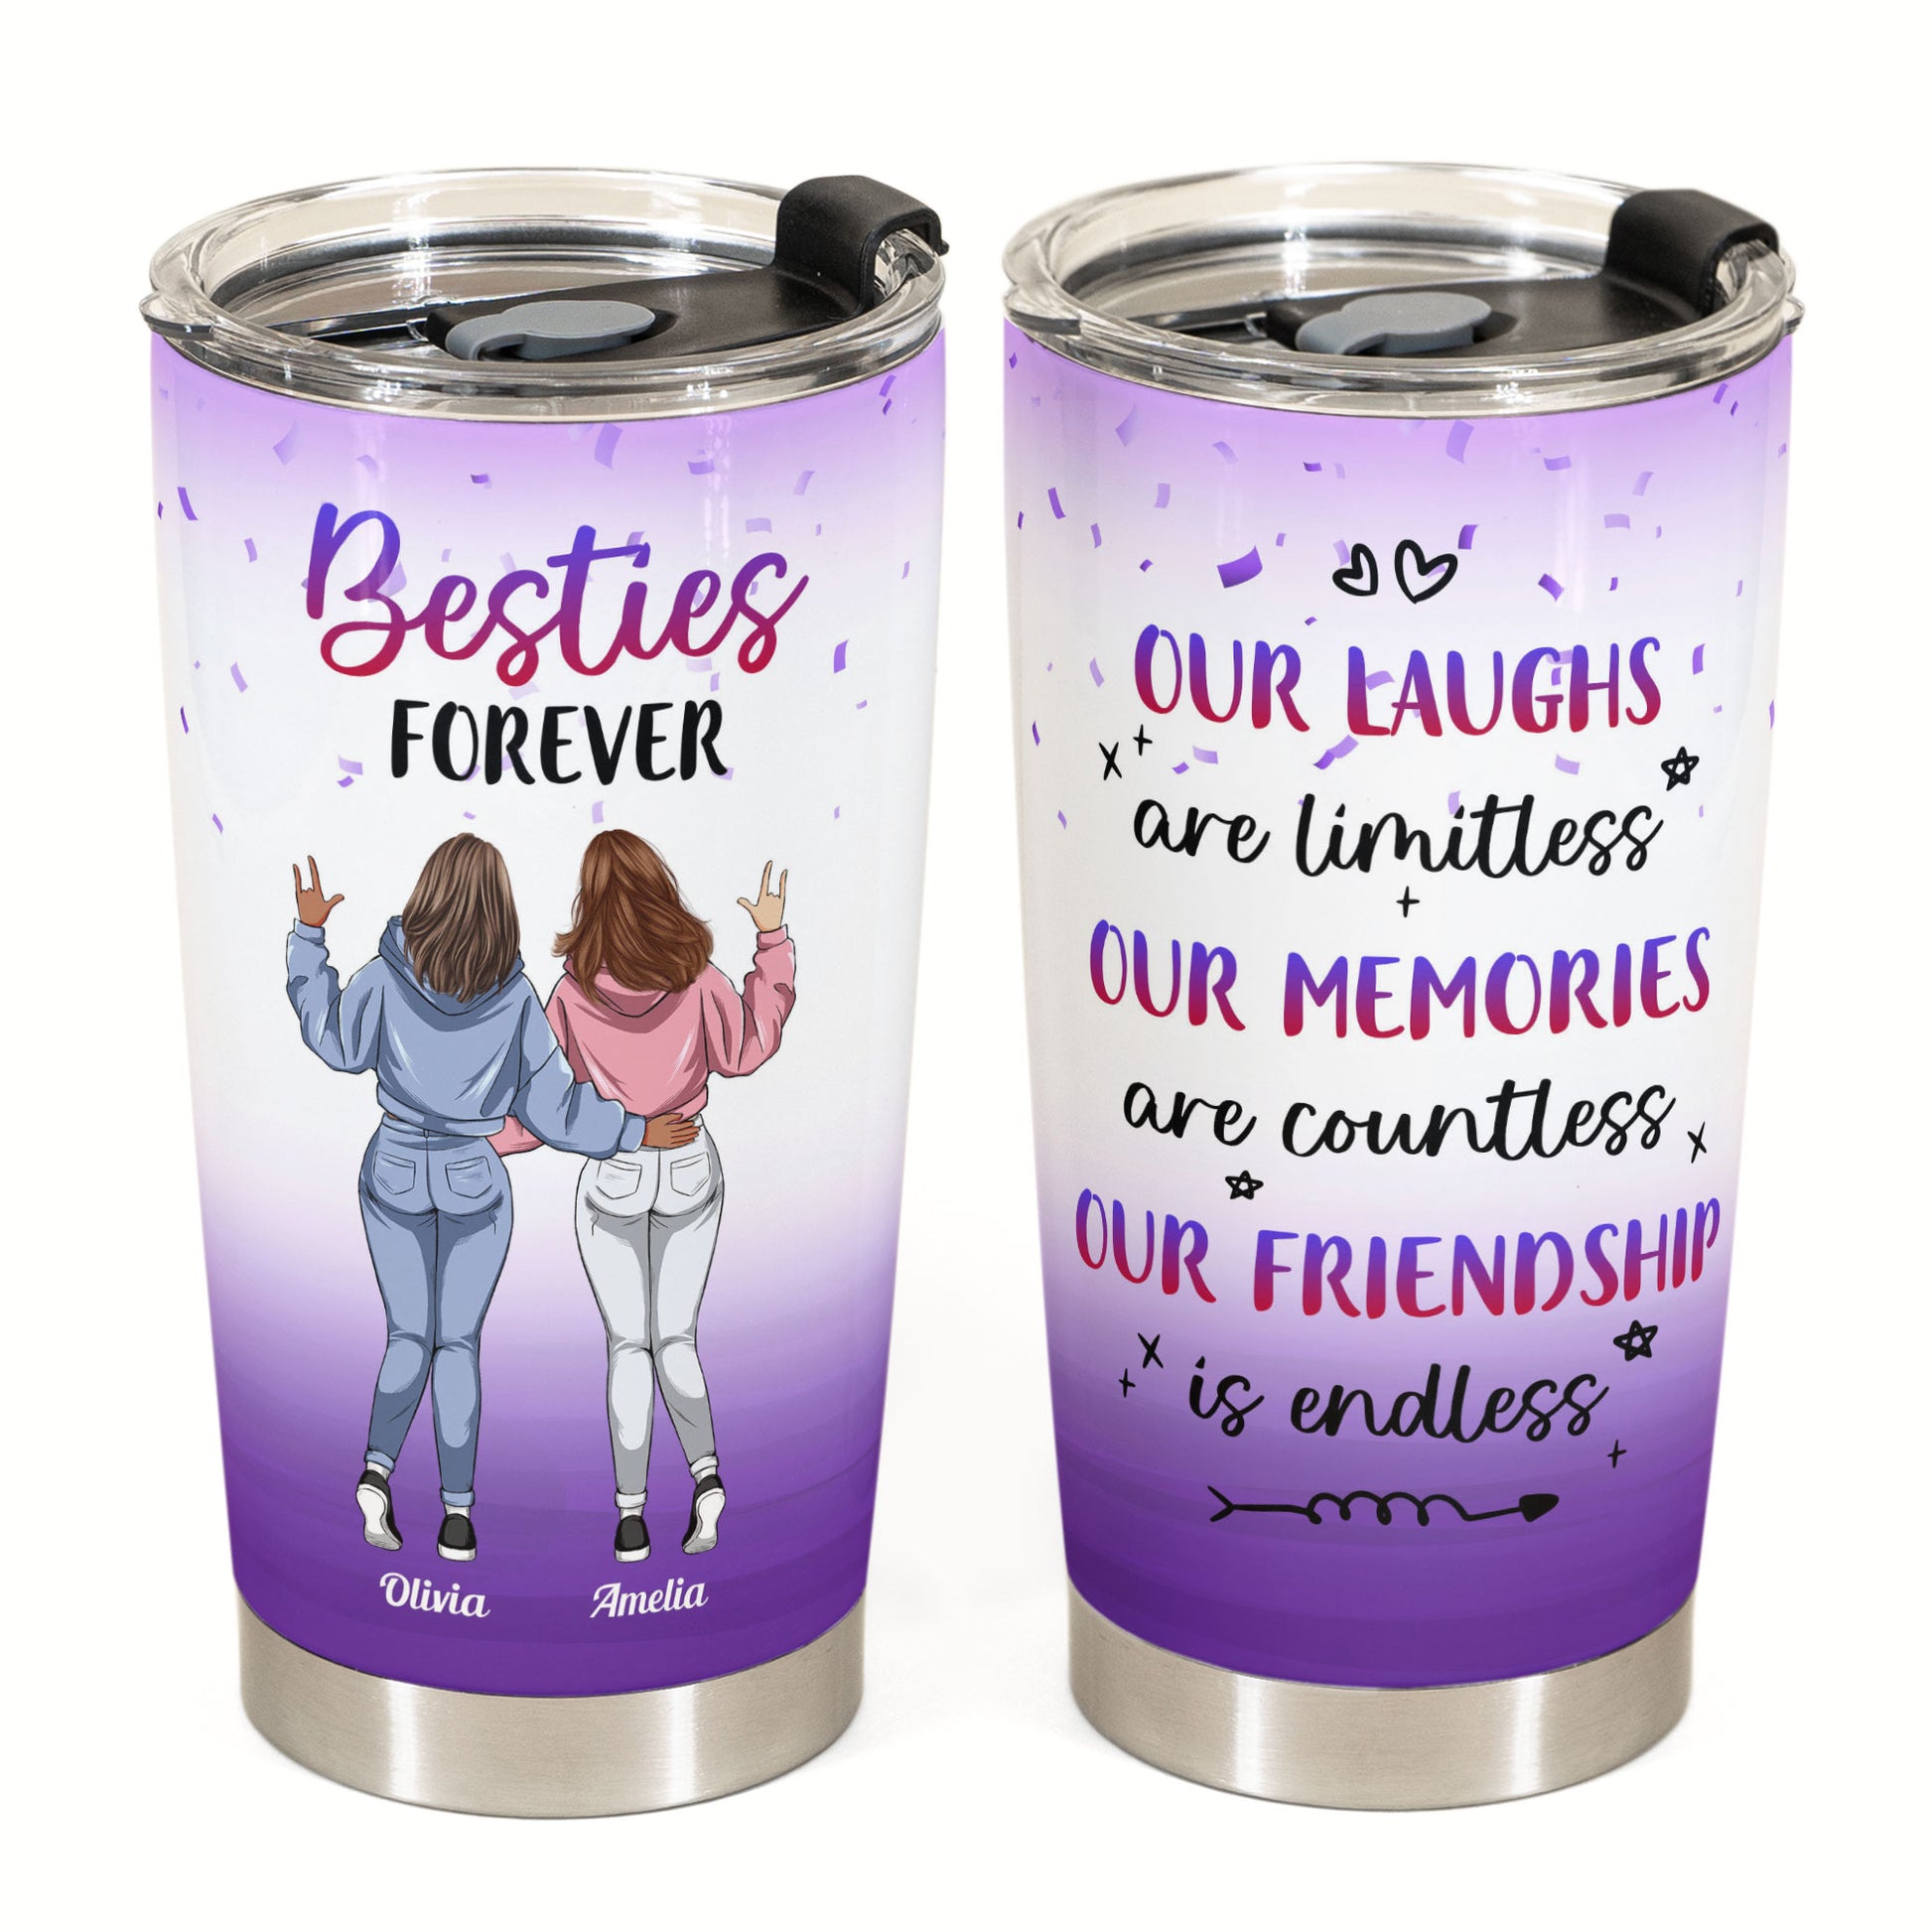 Travel Coffee Mugs Funny Personalized Discount Cute Stainless Steel